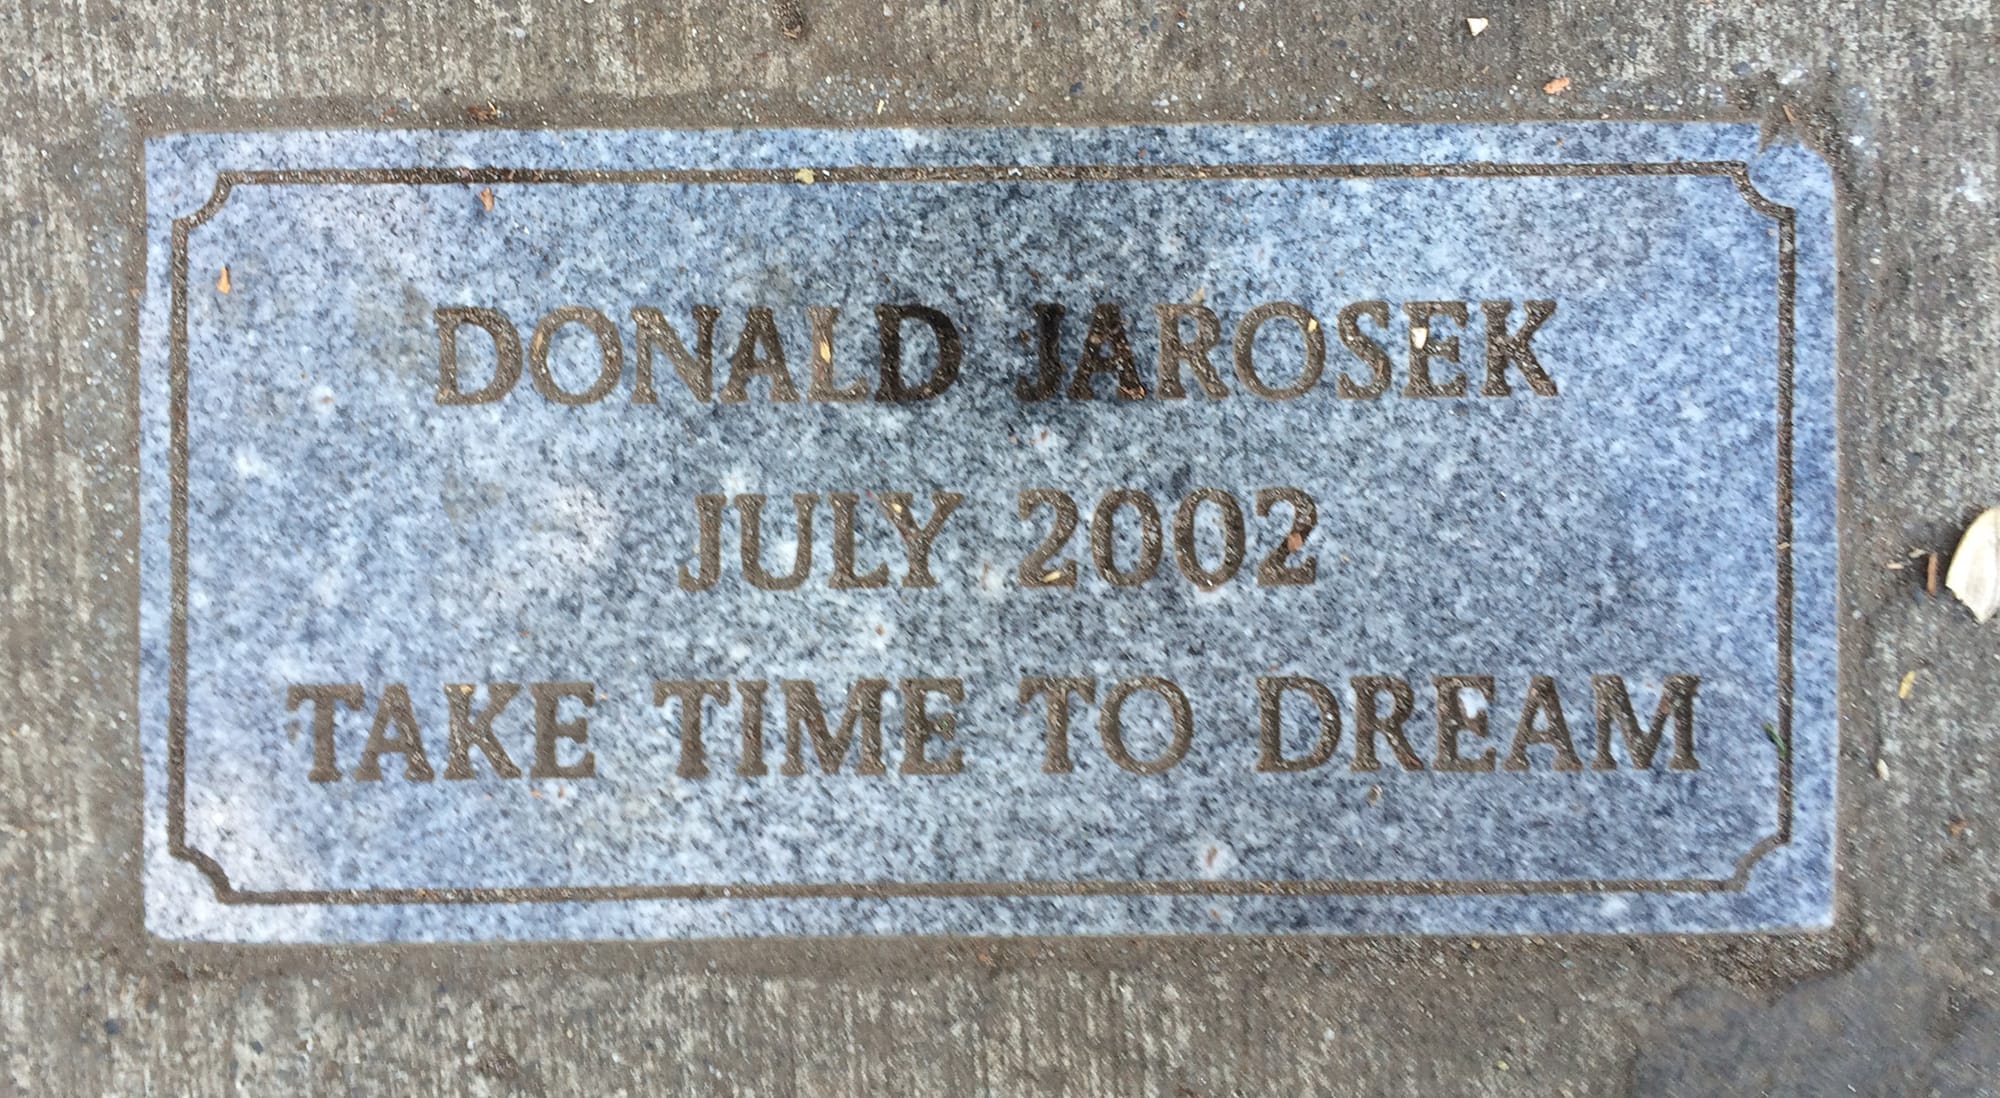 A marker placed in honor of Donald Jarosek at Esther Short Park.